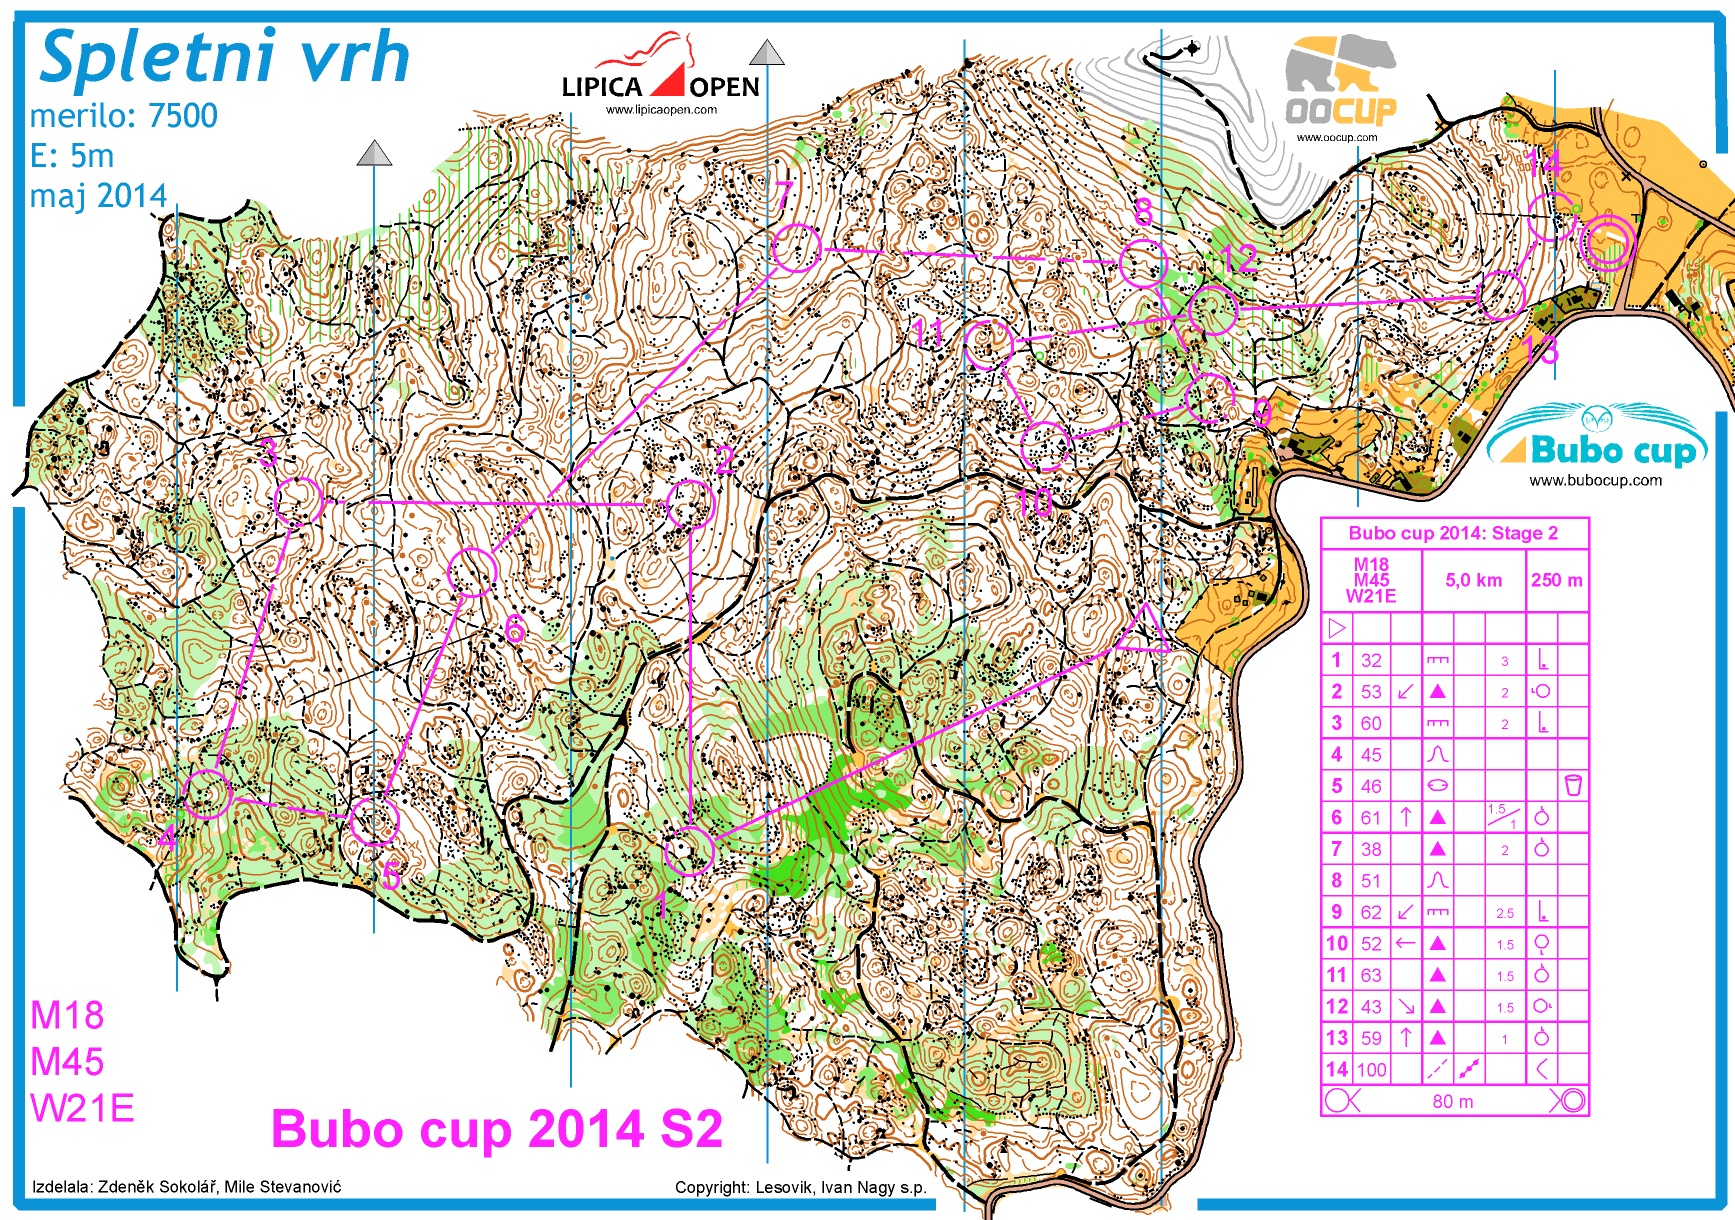 Bubo cup 2014 W21E Stage2 (2014-07-24)